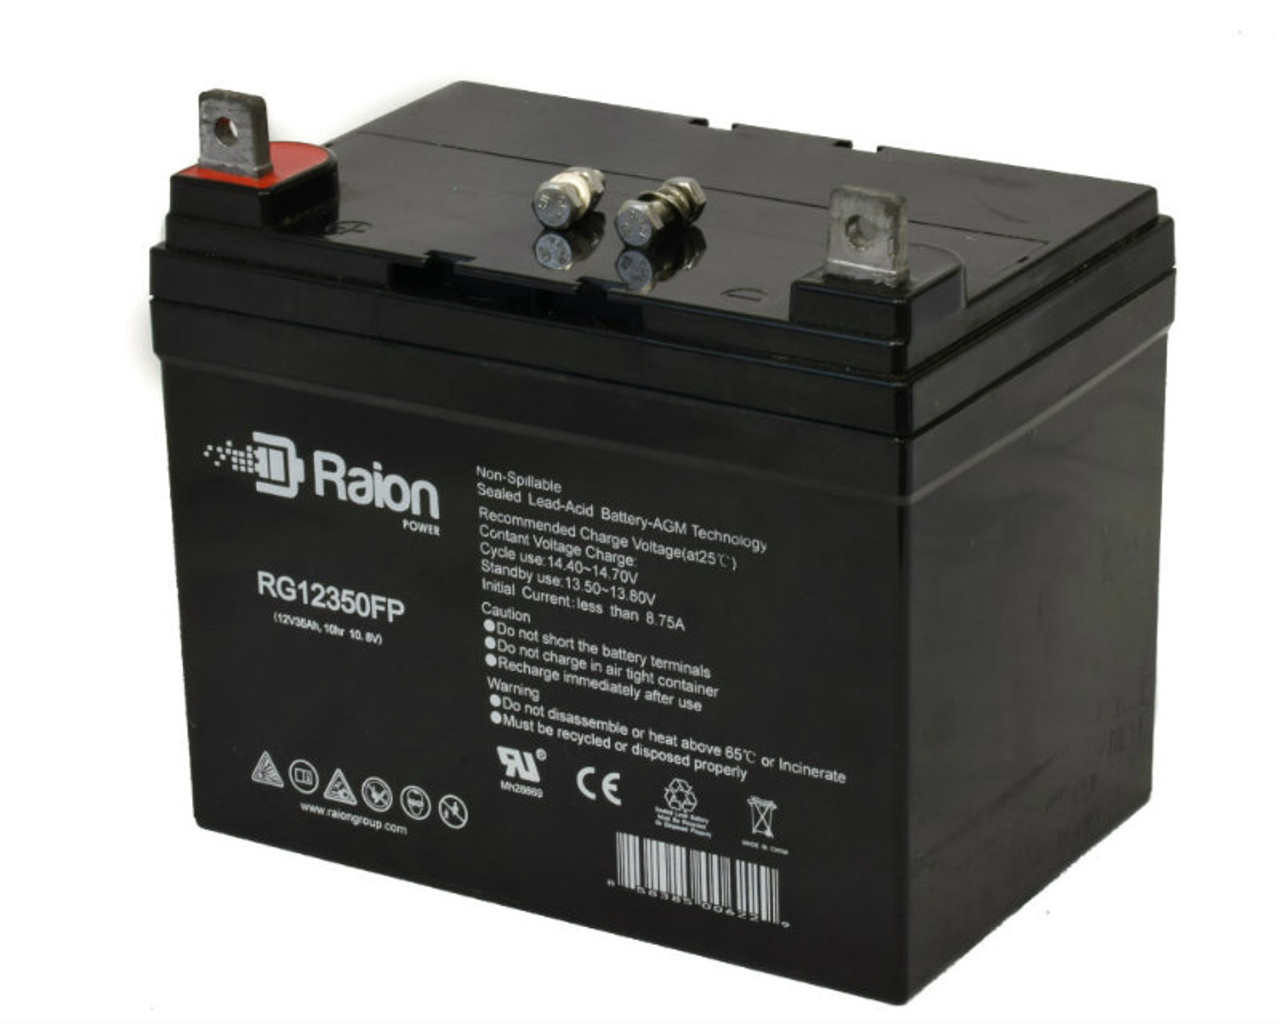 Raion Power Replacement 12V 35Ah RG12350FP Battery for Dixon 4516K